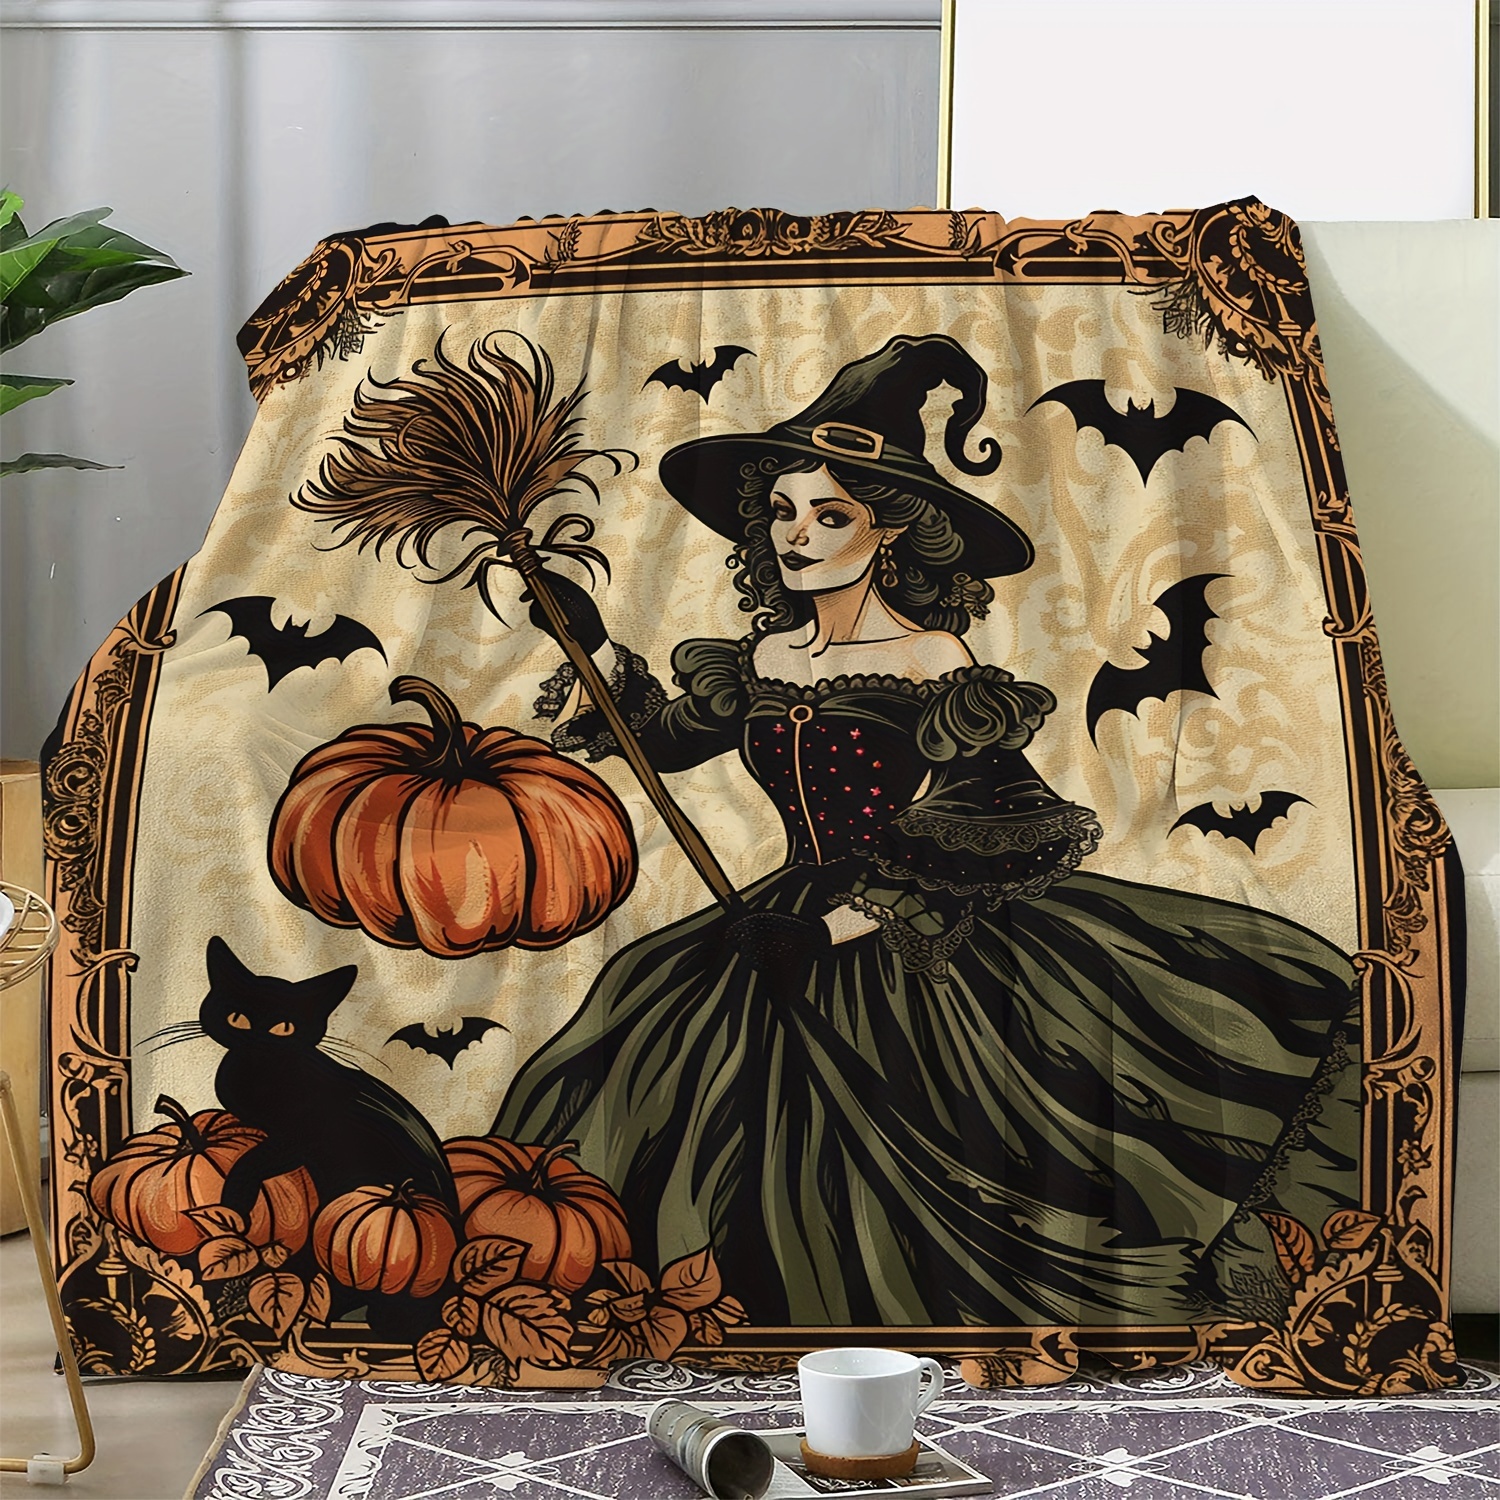 

Cozy Vintage Halloween Flannel Blanket - Witch, Black Cat & Pumpkin Design | Soft, Warm Throw For Couch, Bed, Car, Office, Camping | All-season Gift Blanket Halloween Blanket